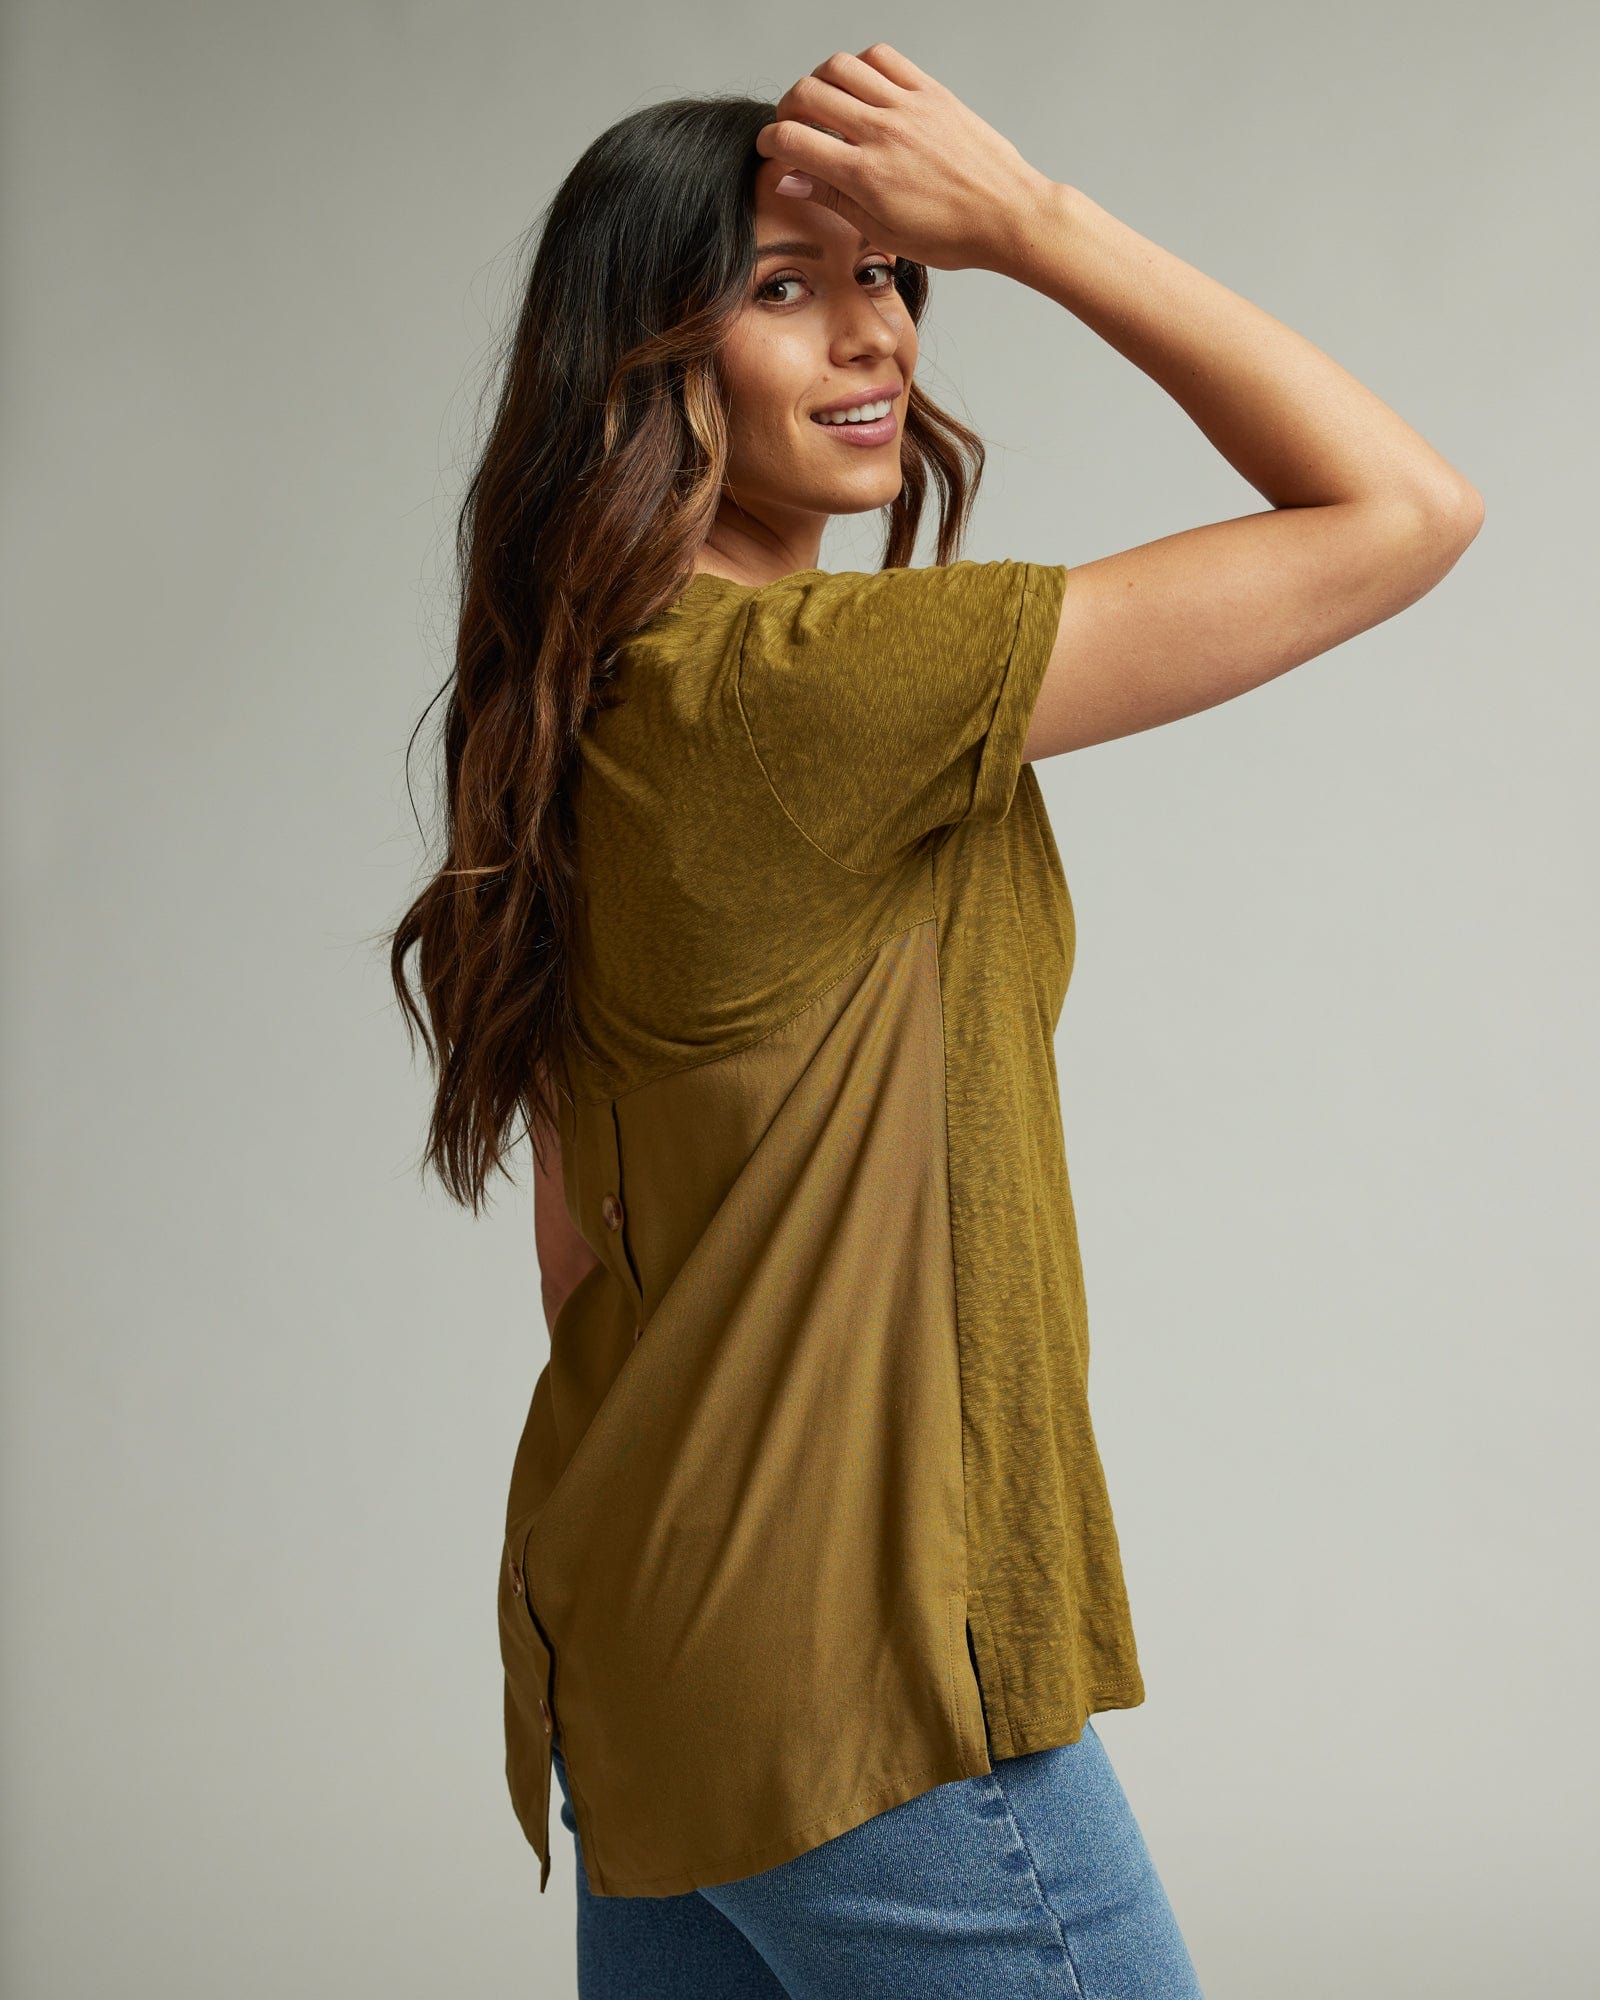 Woman in a short sleeve, v-neck, green blouse